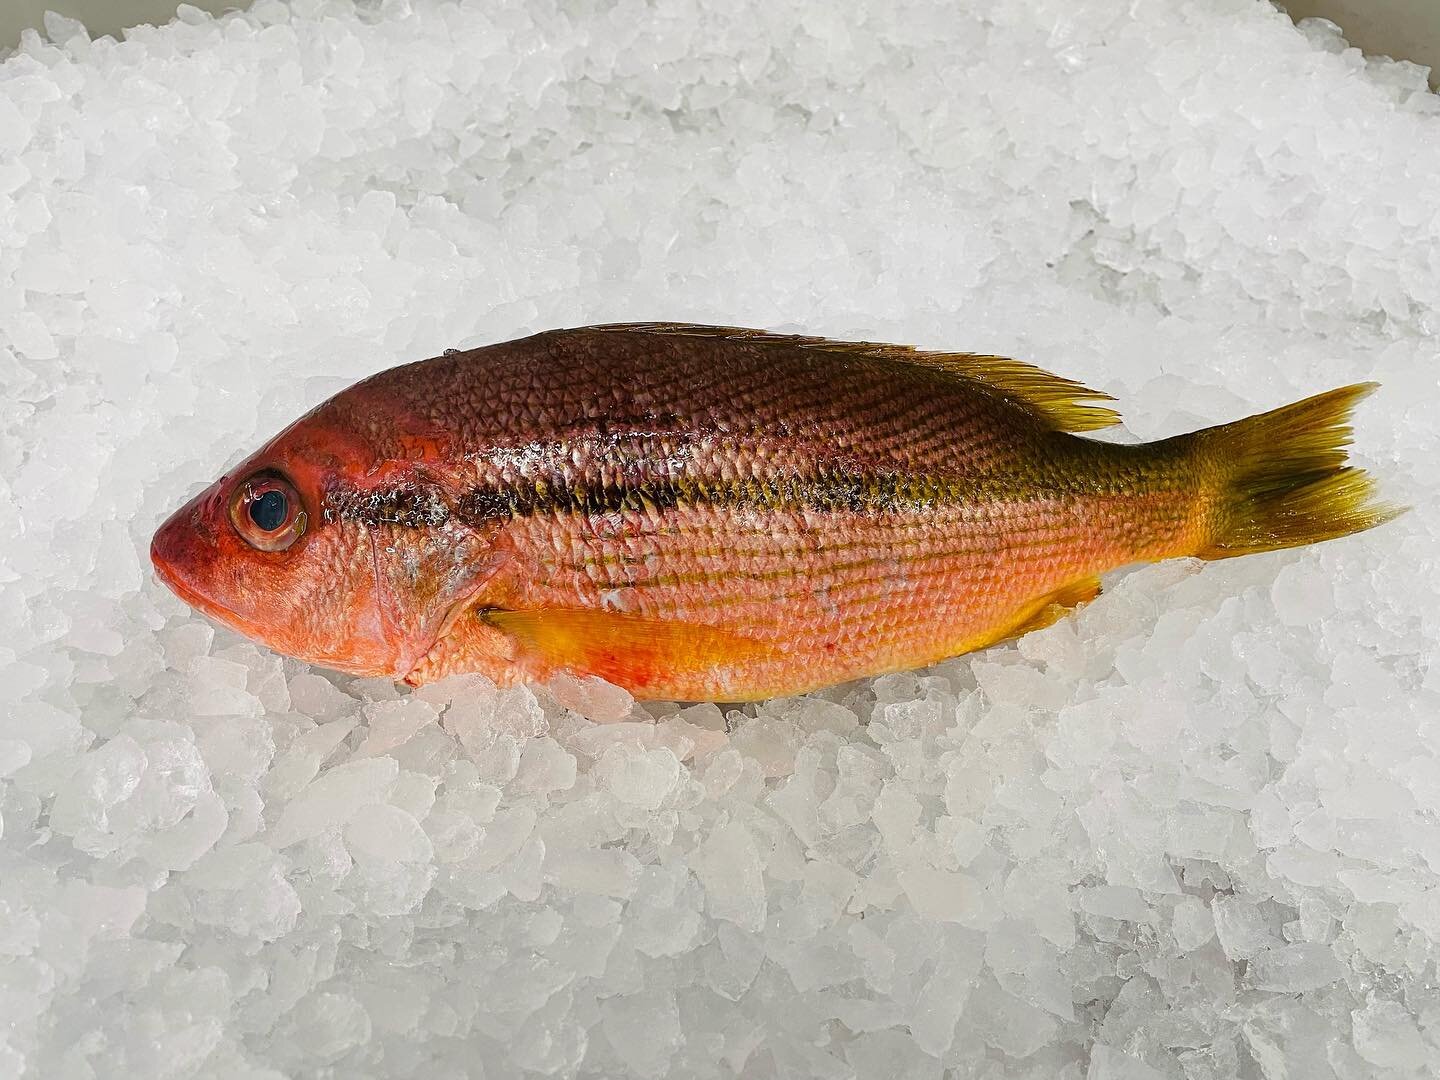 🐟 Yokosuji Fuedai - Brown stripe red snapper from Japan 🇯🇵 

☎️ Call 713-783-1688 for pre-order

#owavesproducts #japanfish #seafood #htx #houston #japanesefood #houstonrestaurants #fishmarket #wholesaler #chef #instagood #fuedai #brownstripe #jap